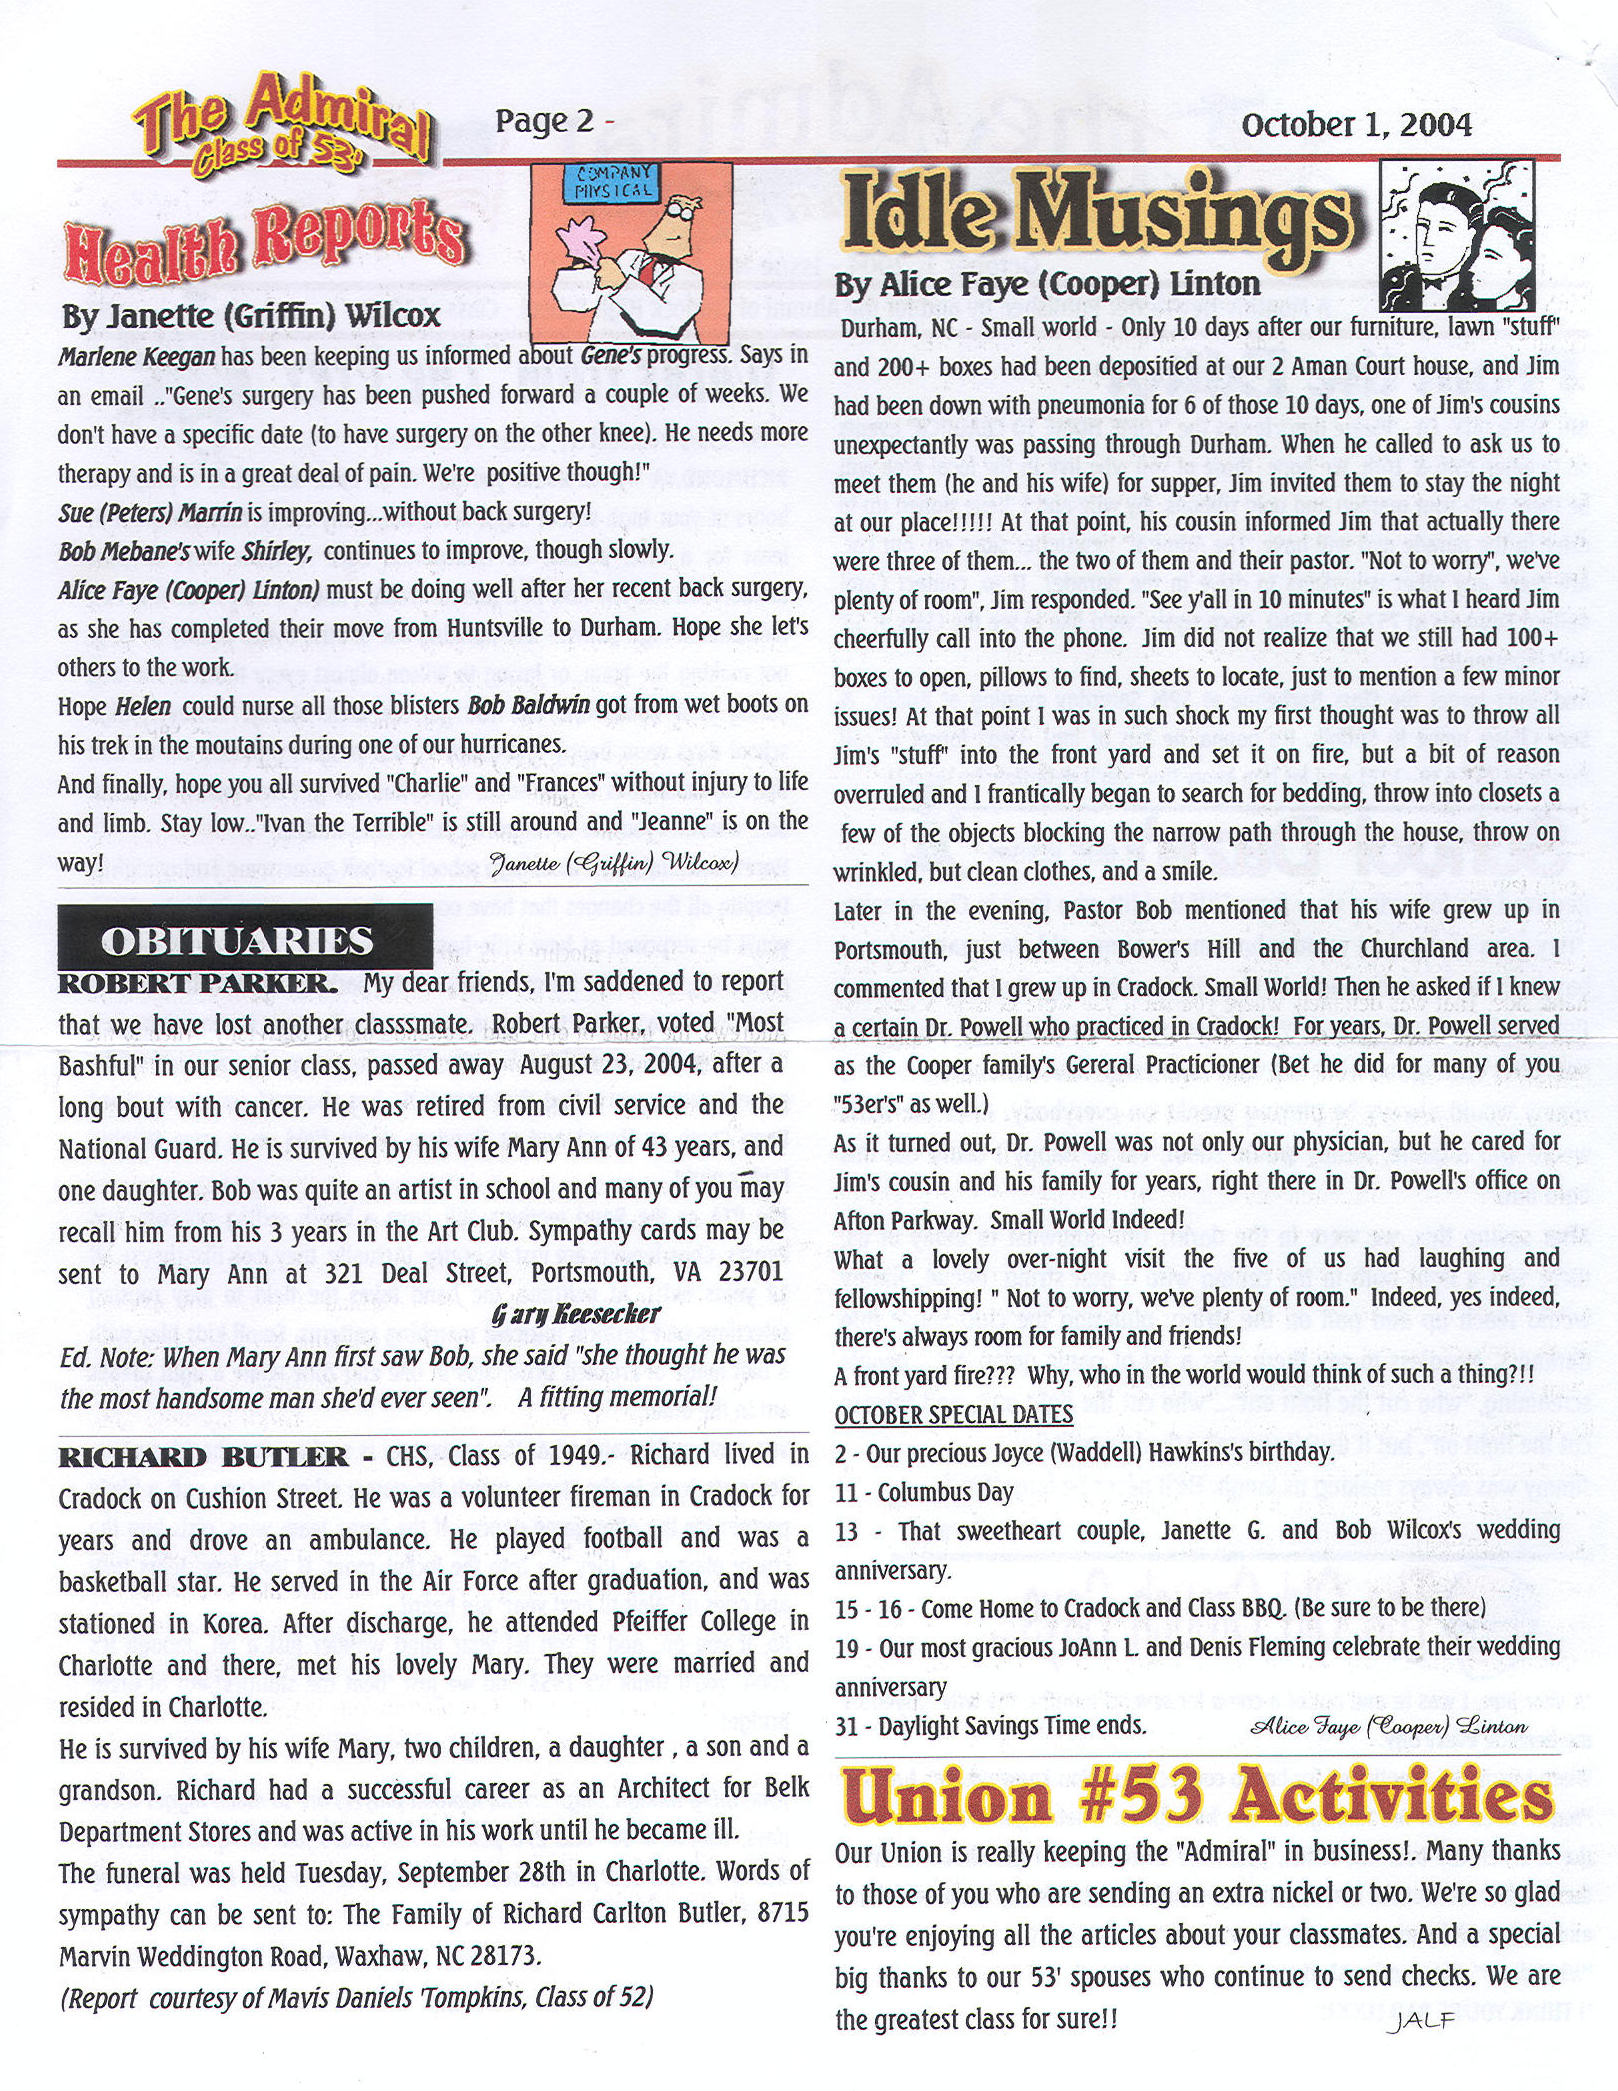 The Admiral - October 2004 - pg. 2